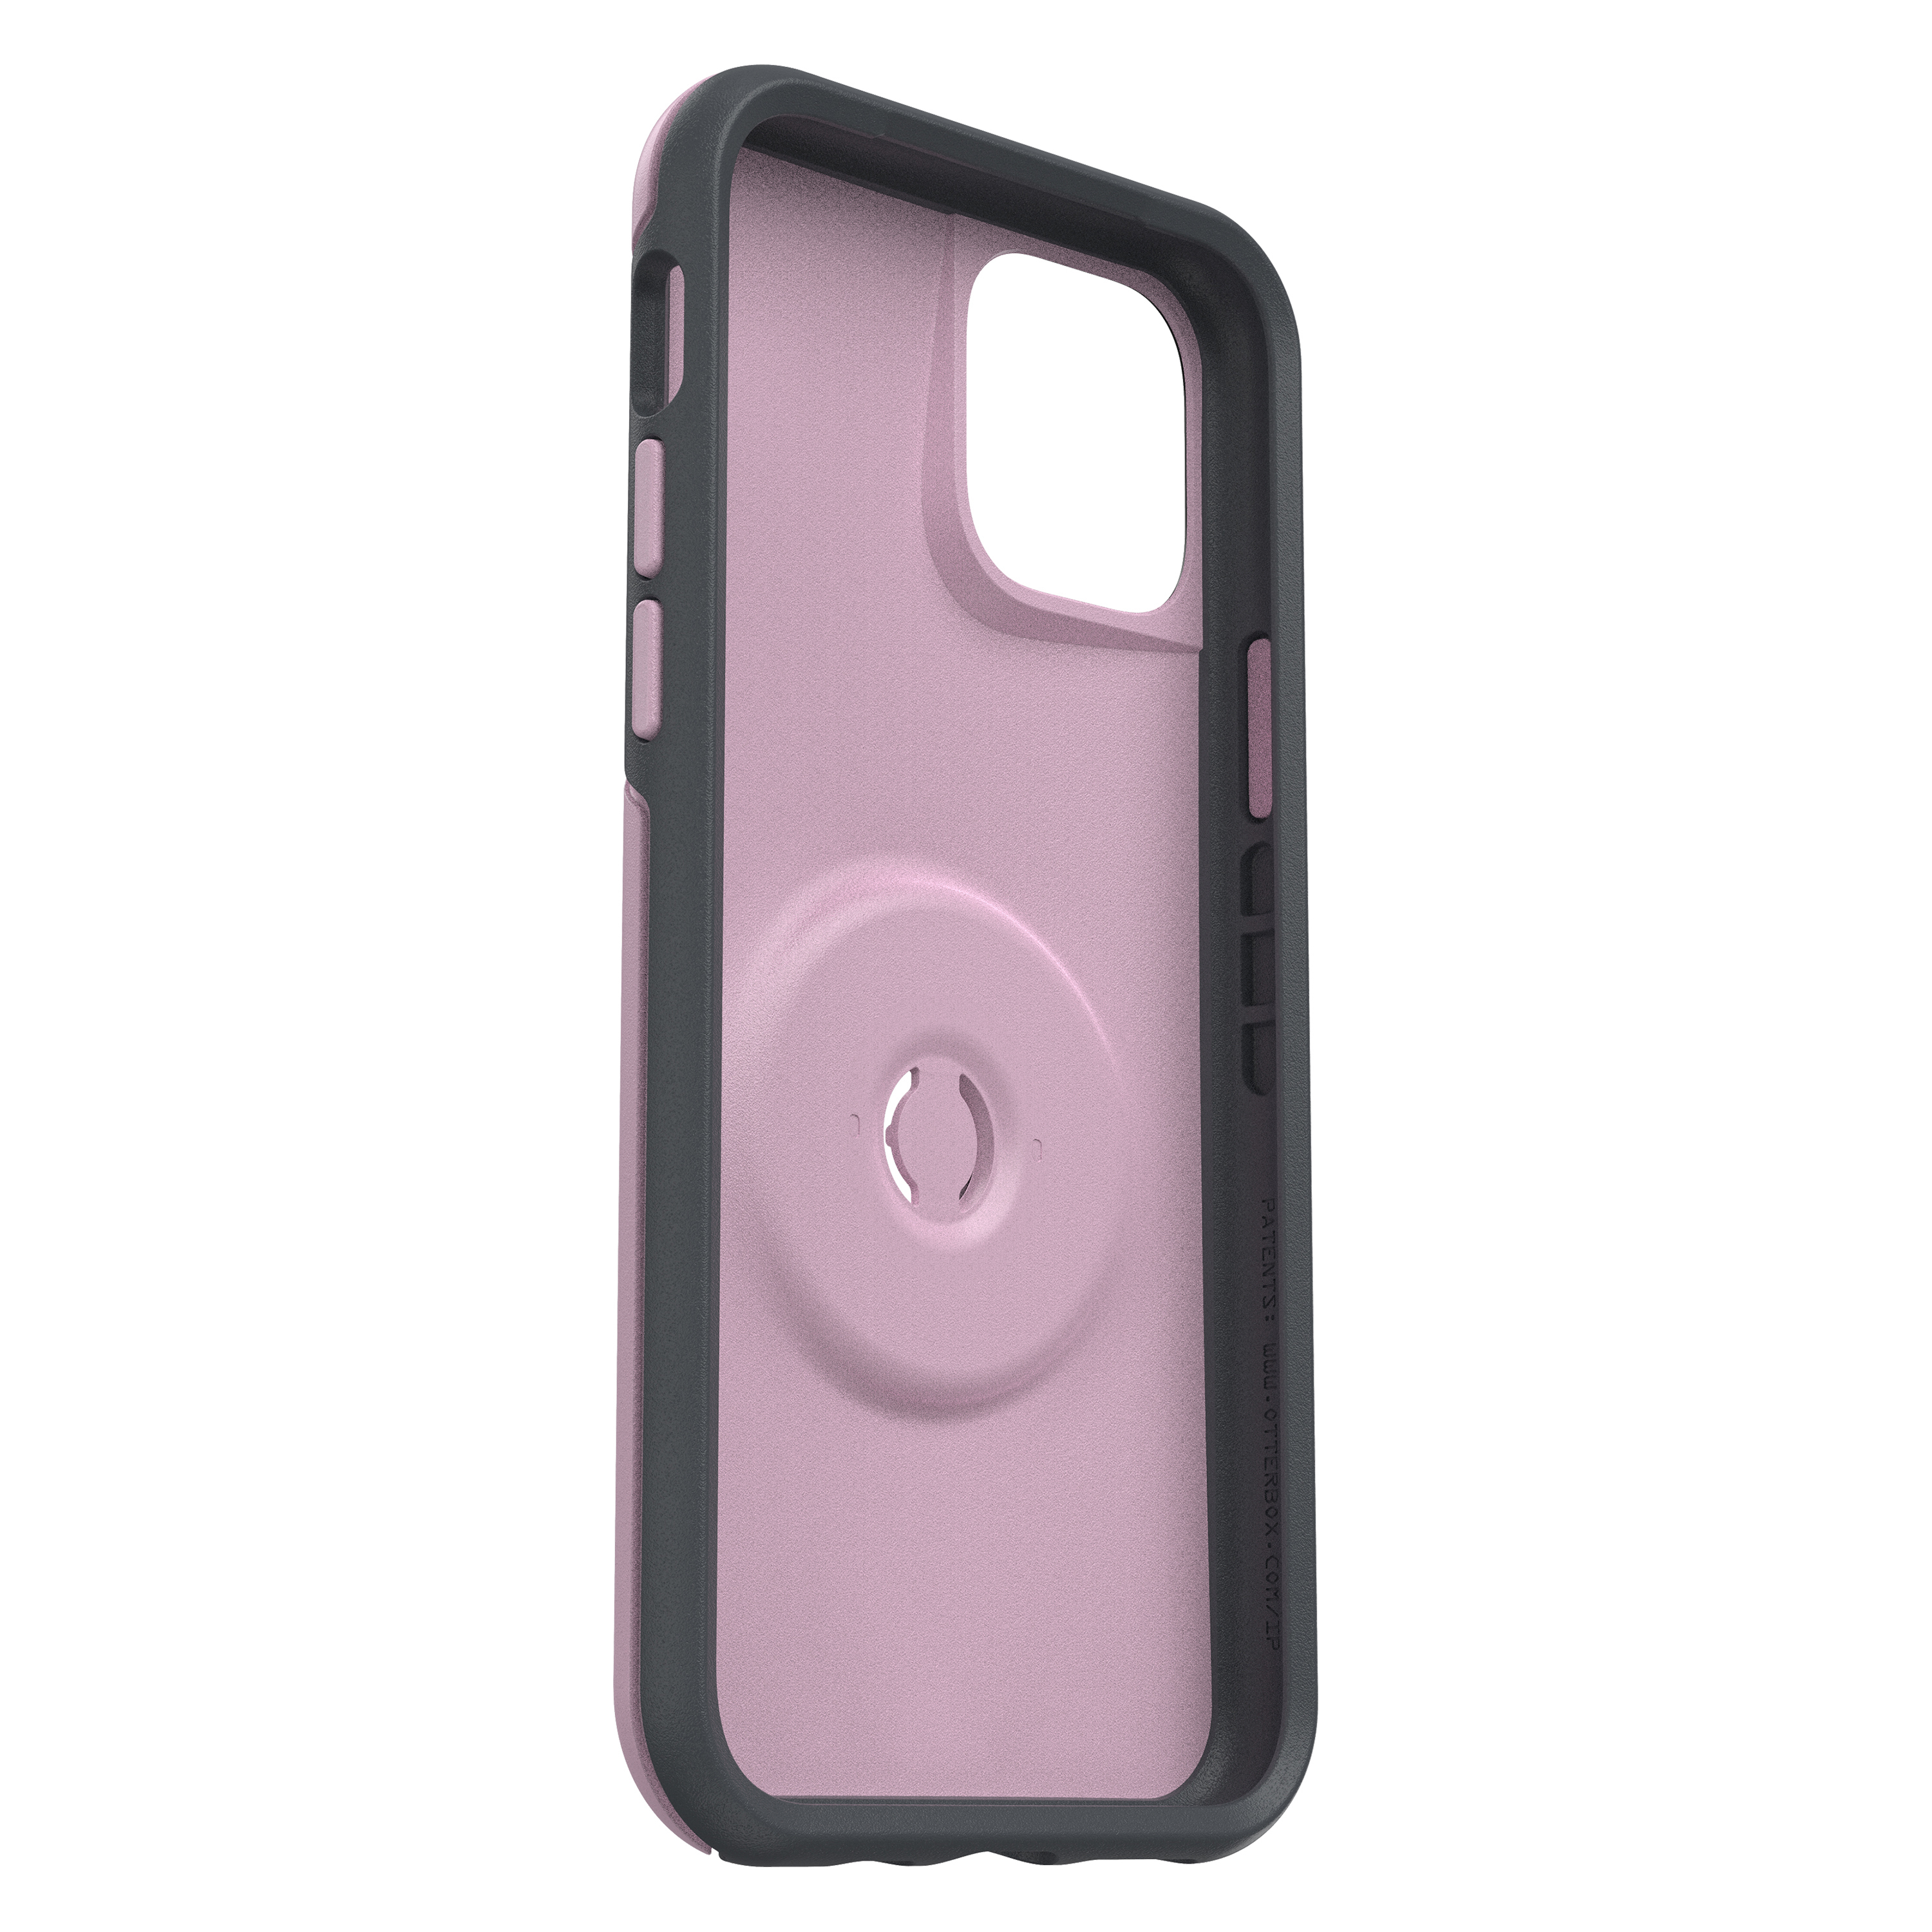 Pro, 11 iPhone Symmetry, Apple, OTTERBOX Rosa Backcover,